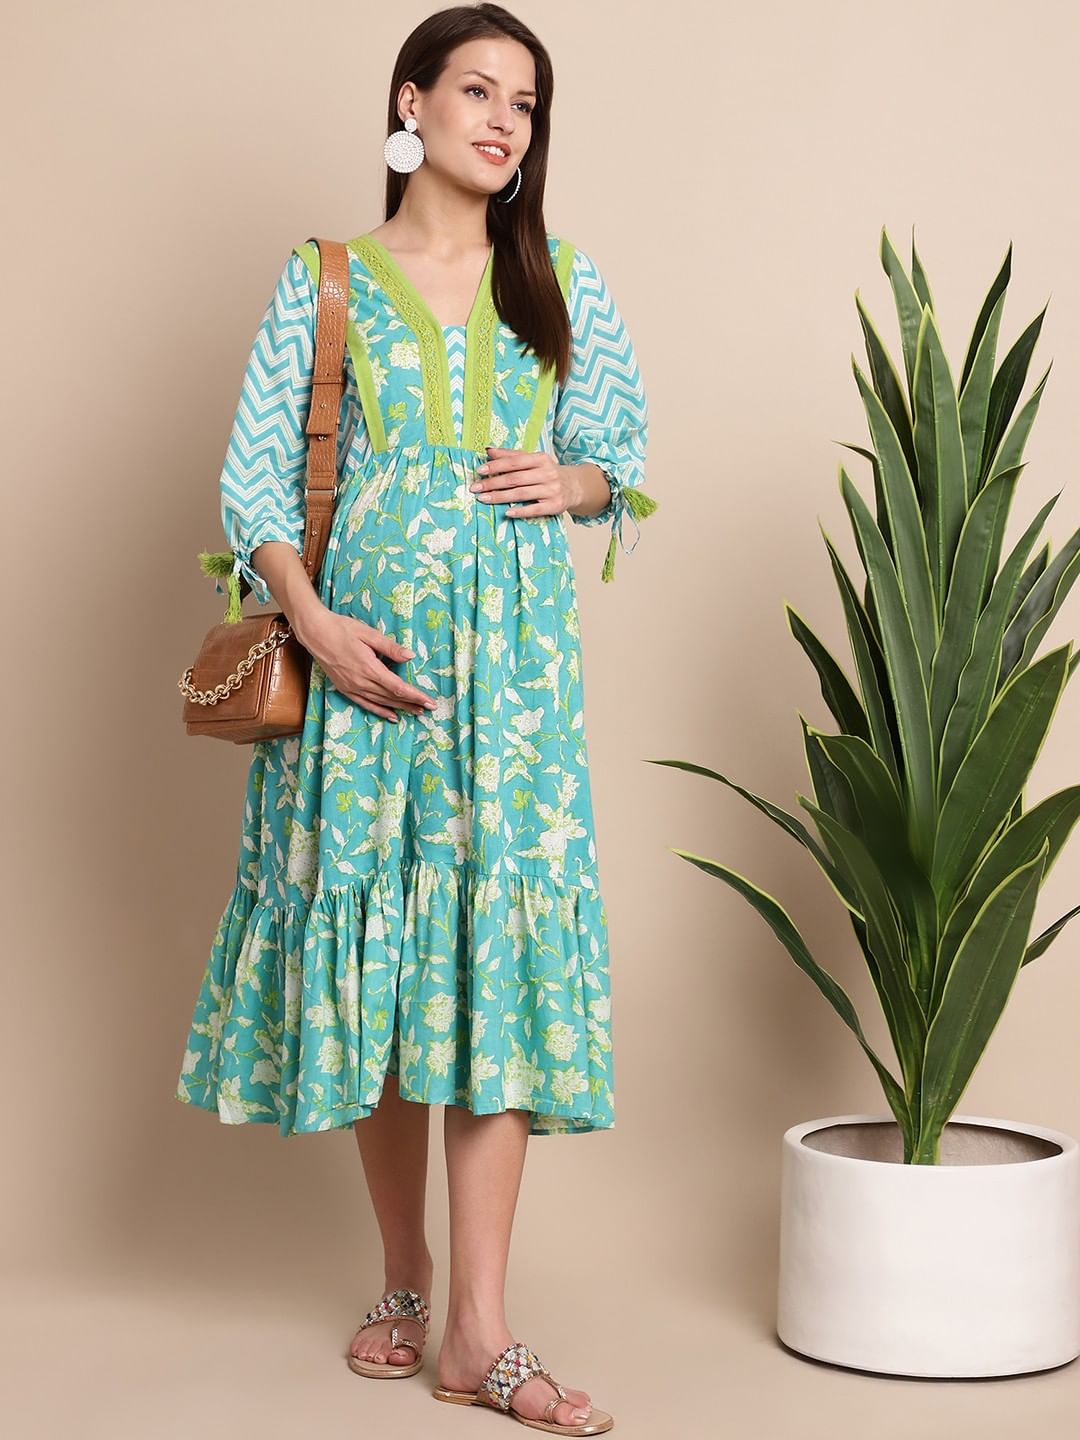 Turquoise & Yellow Floral Maternity Dress